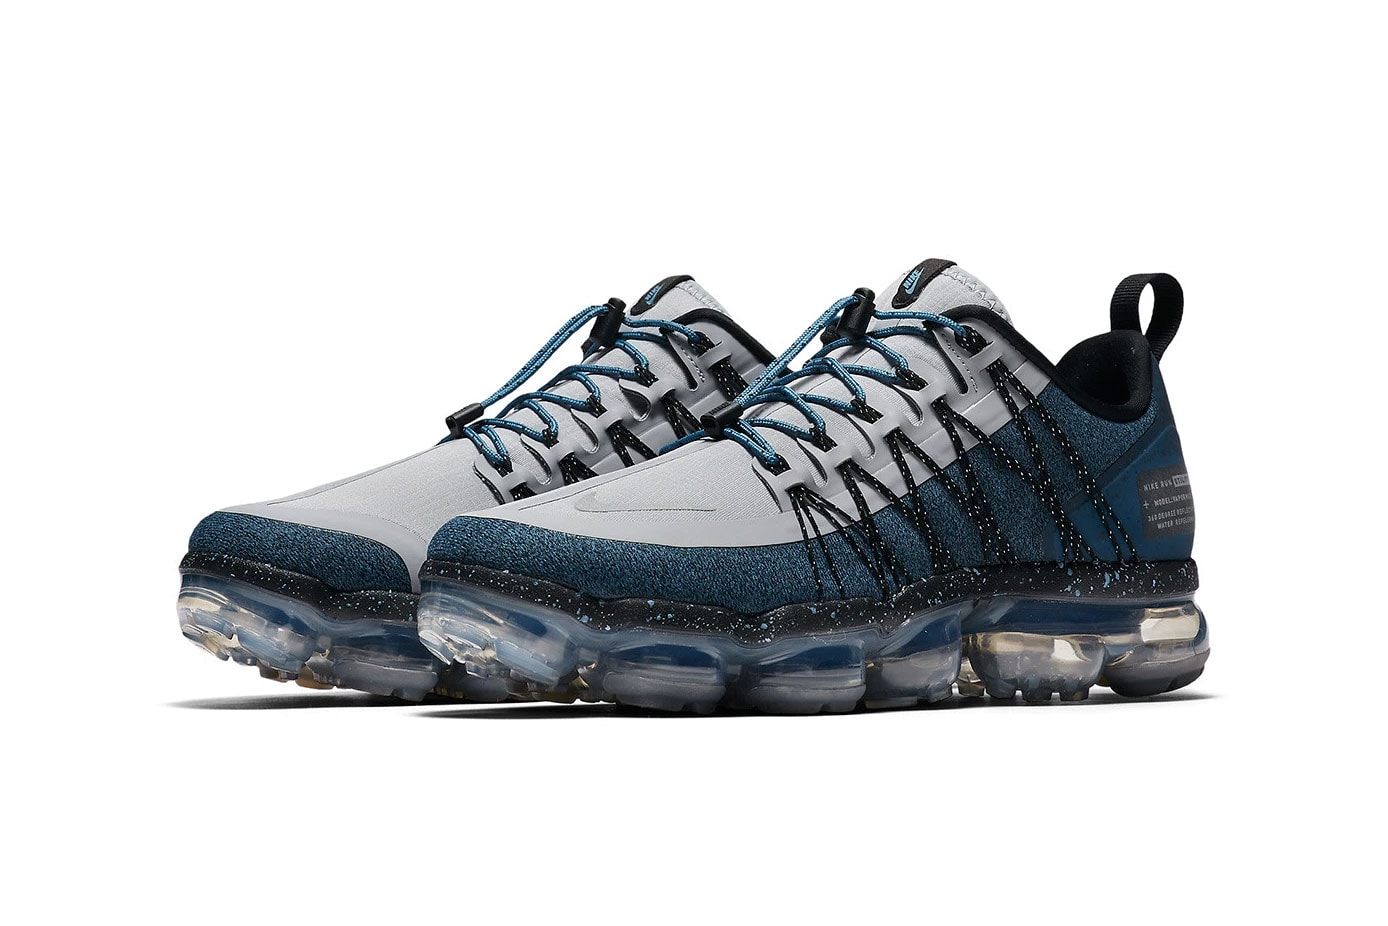 Nike Air Vapormax Run Utility "Celestial Teal" release date info sneaker colorway price purchase online 